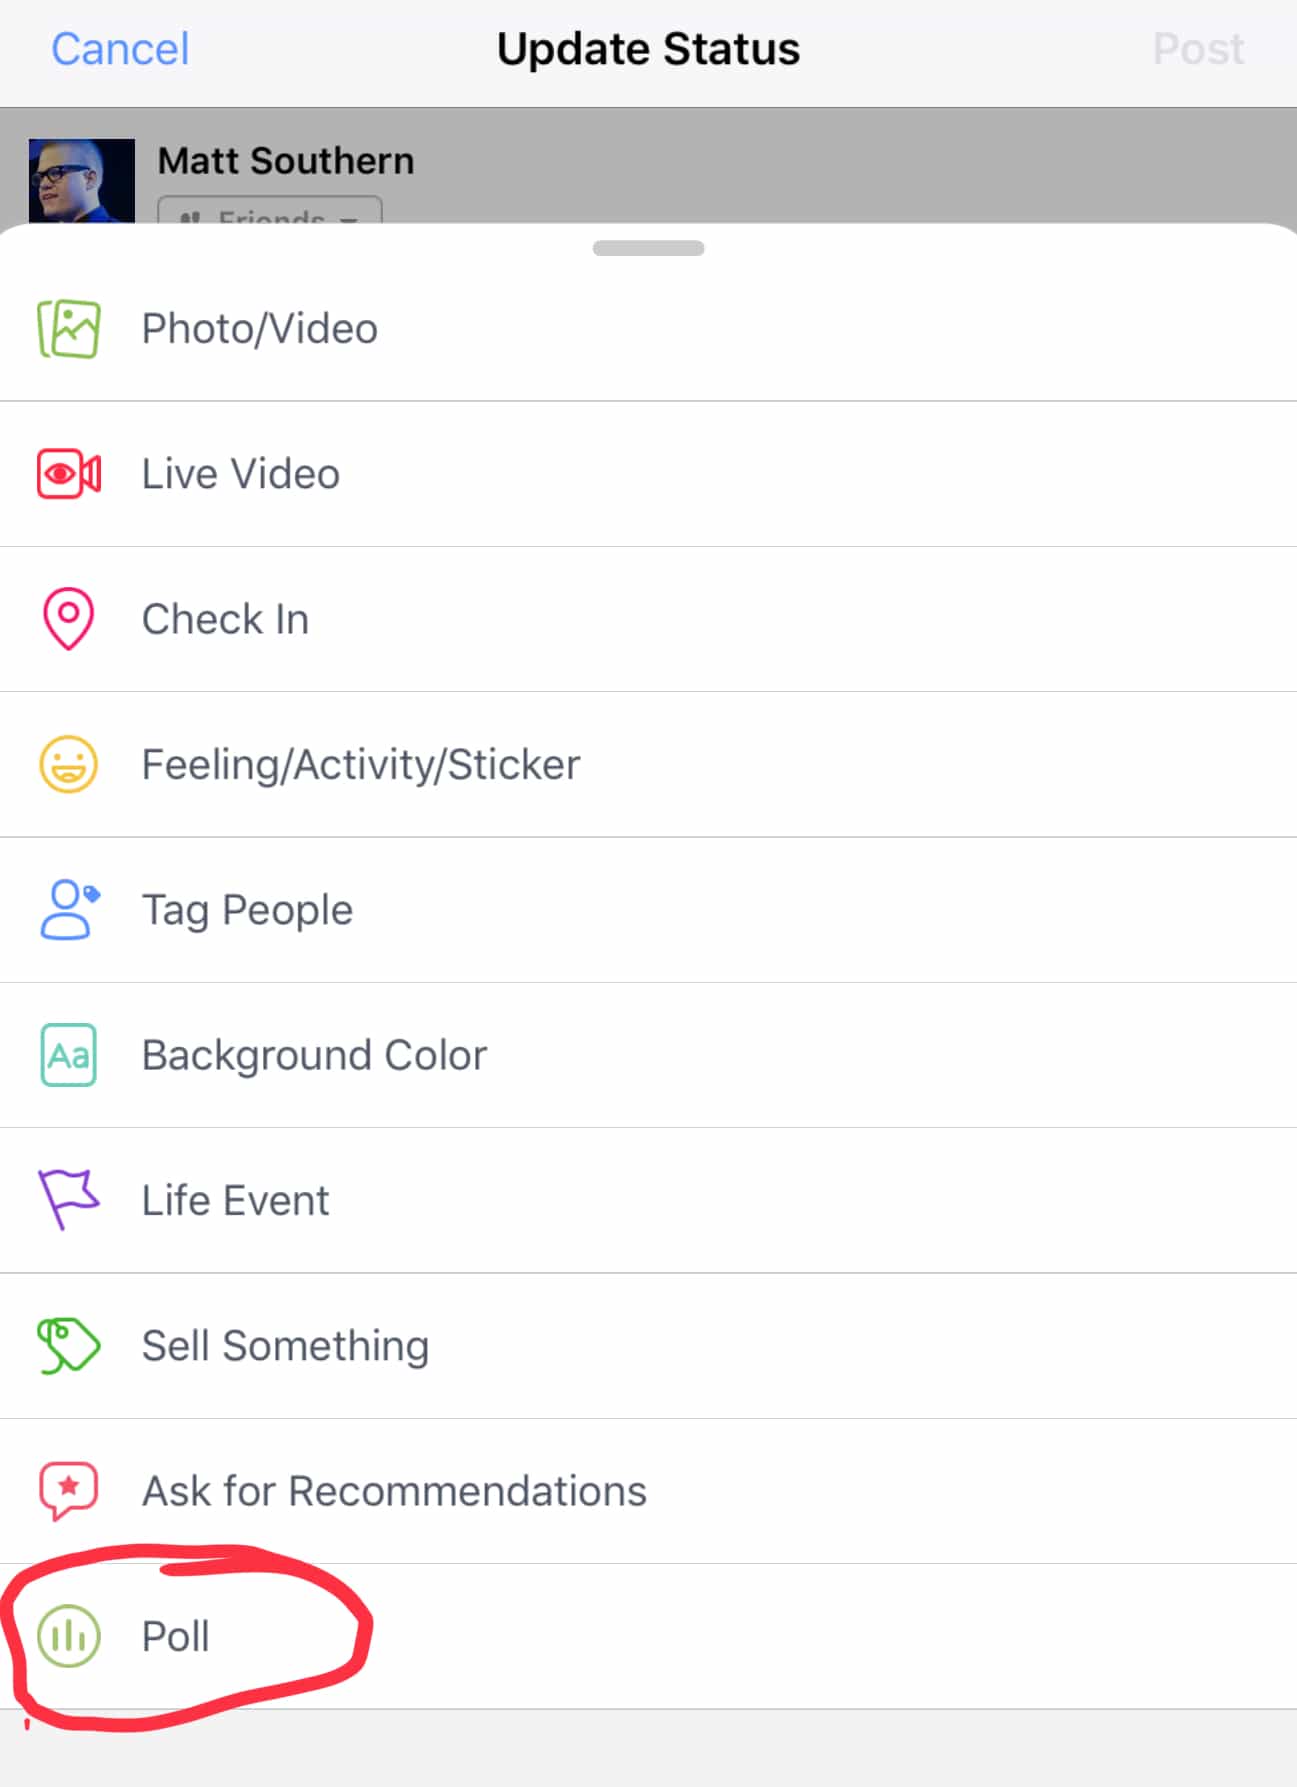 Facebook Introduces a Simple Polling Feature With Support for GIFs